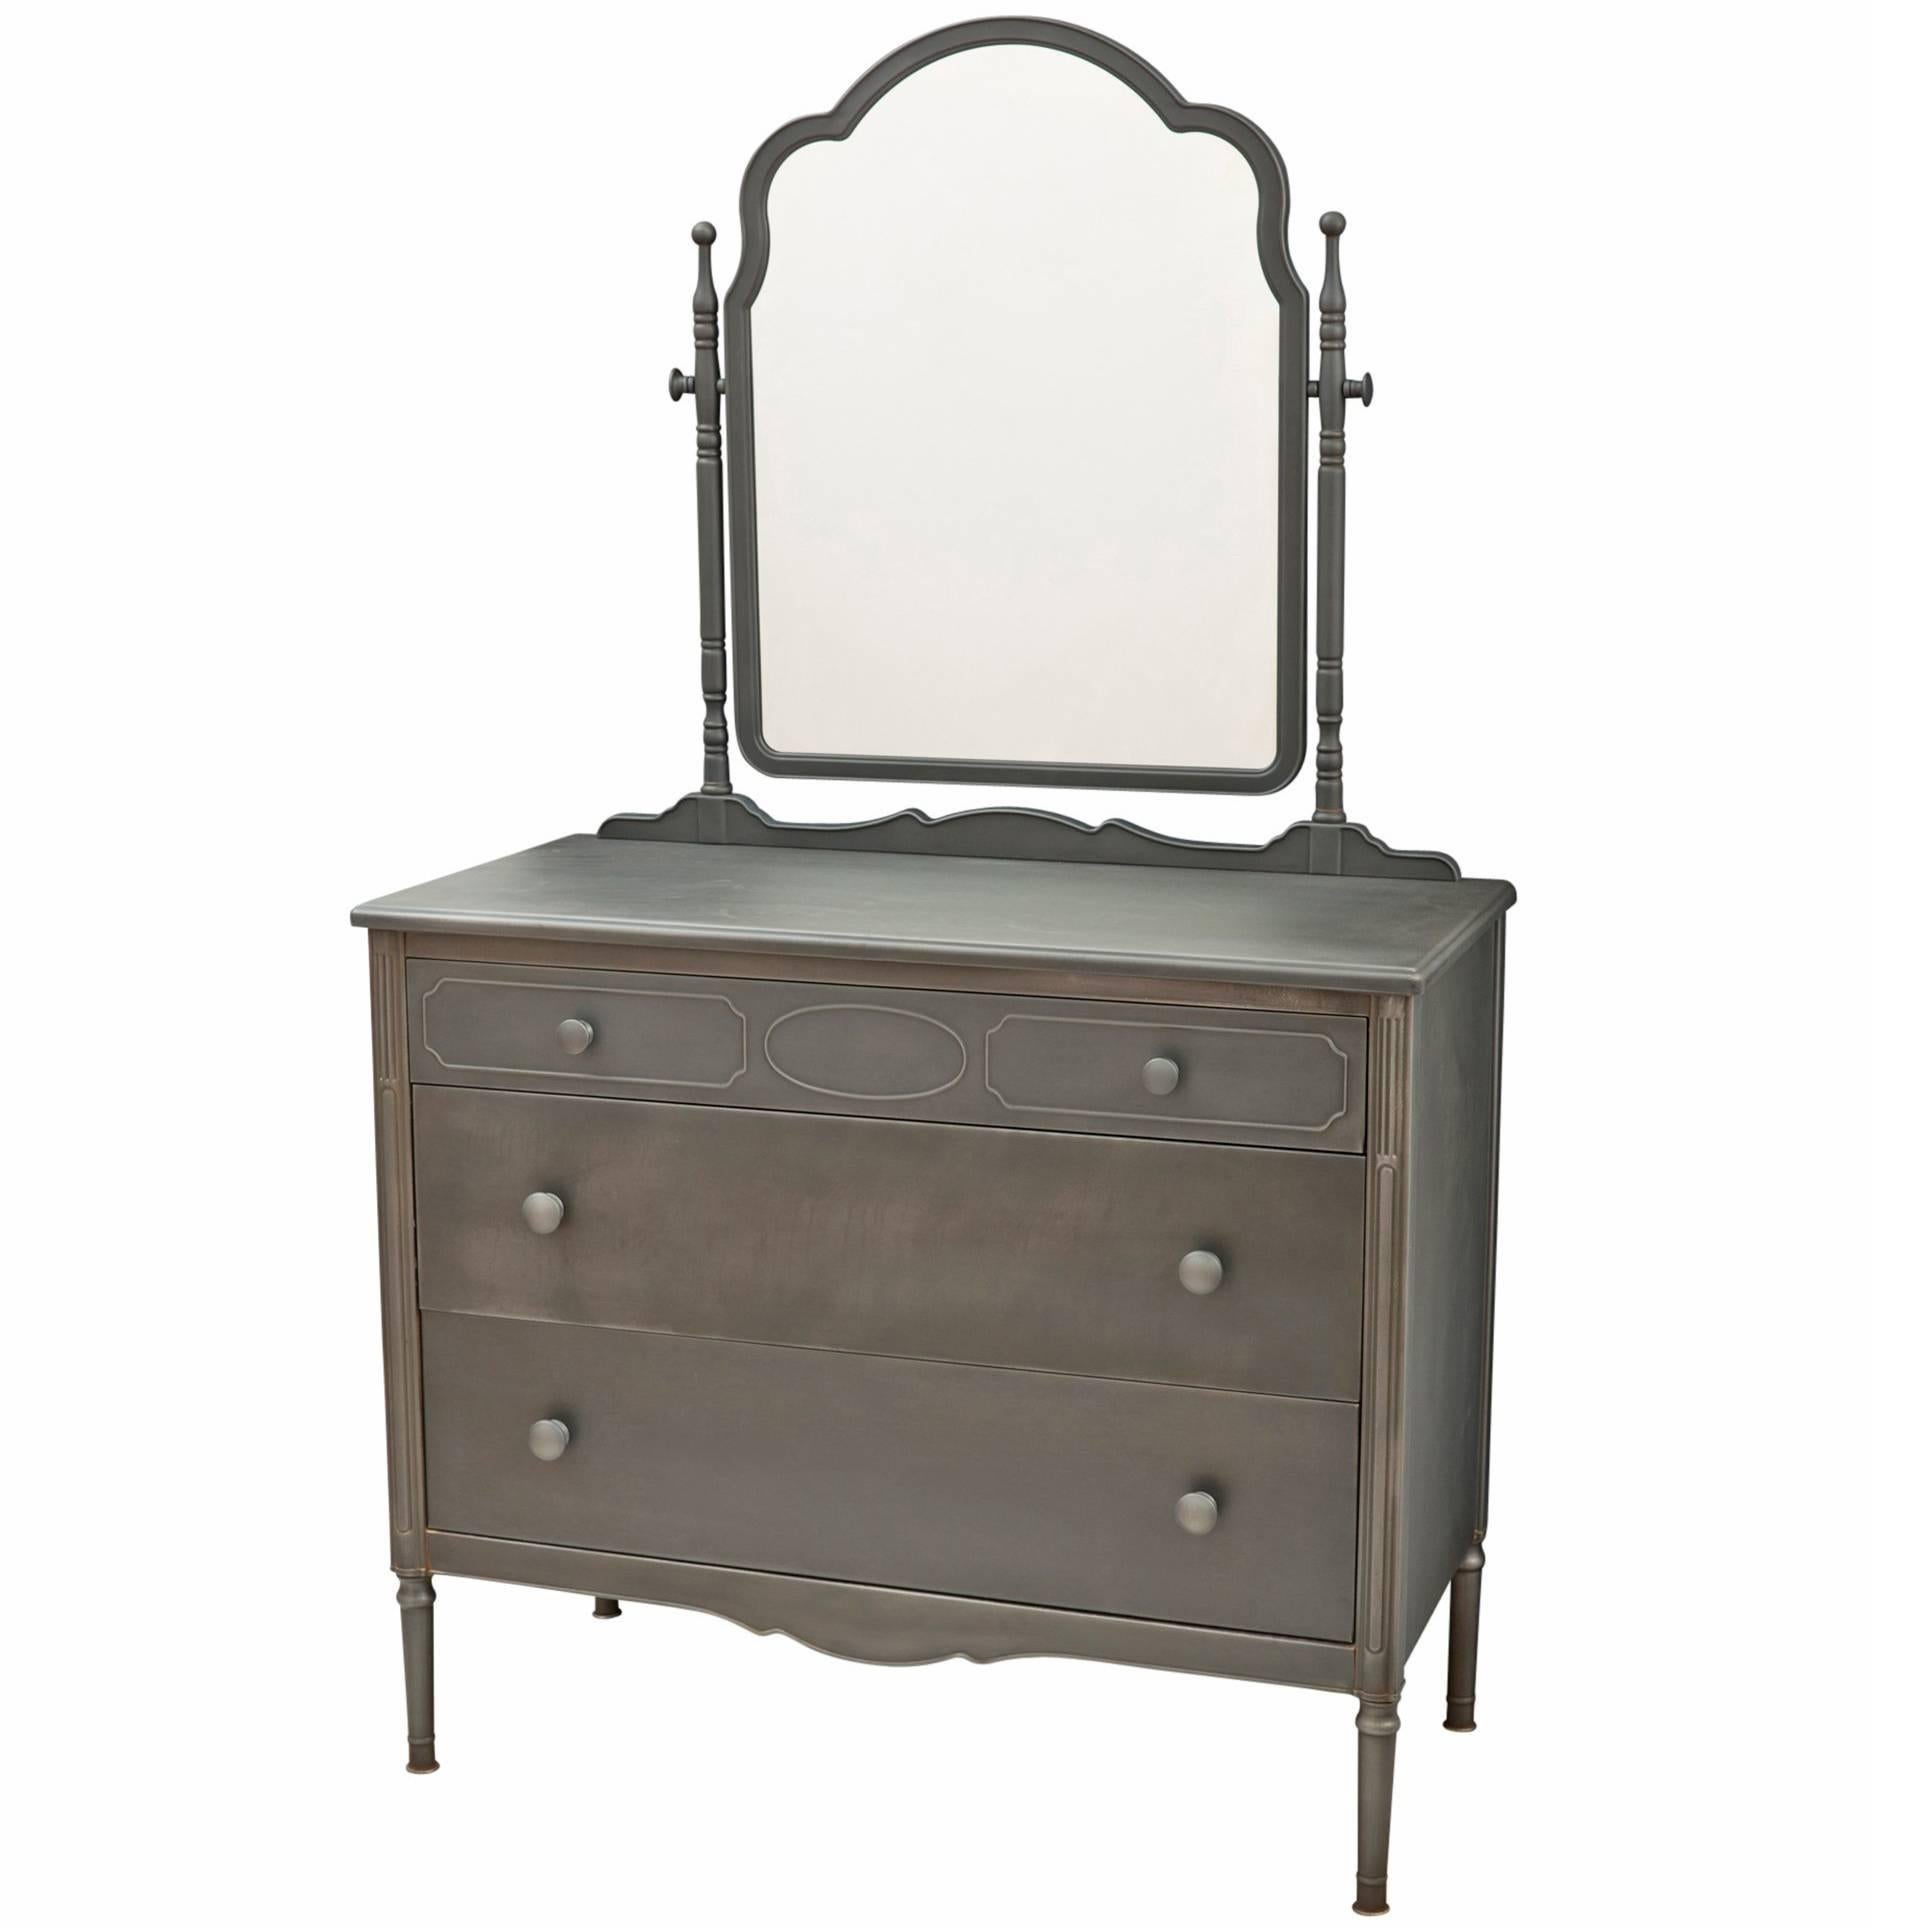 Stripped Steel Dresser with Mirror by Simmons, circa 1928